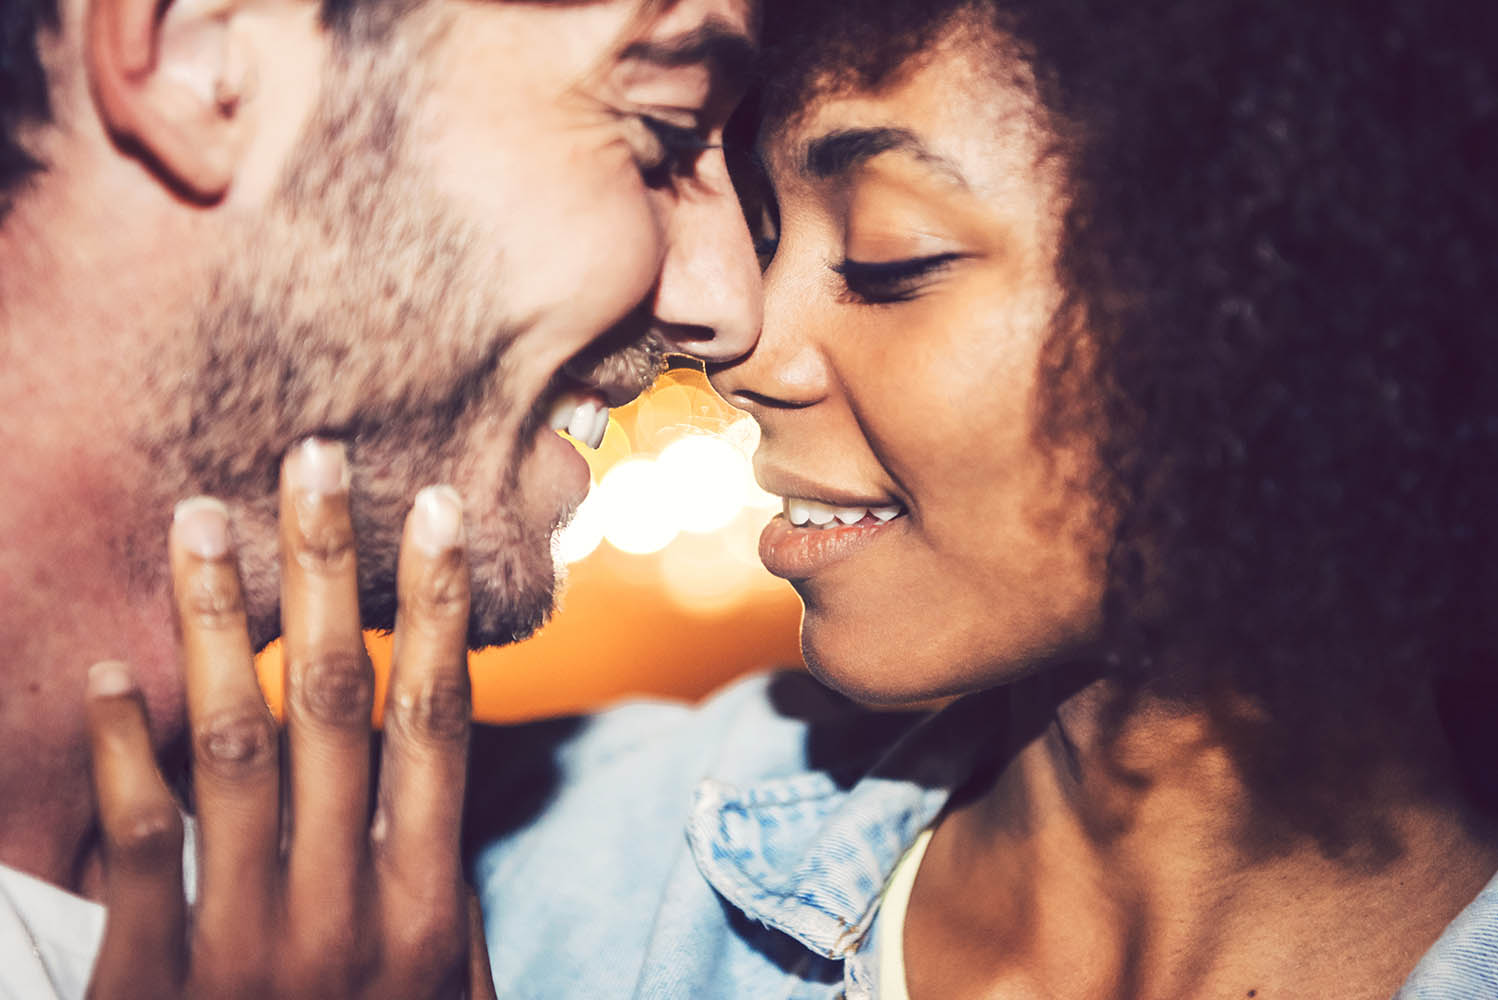 Beautiful interracial couple showing their love.